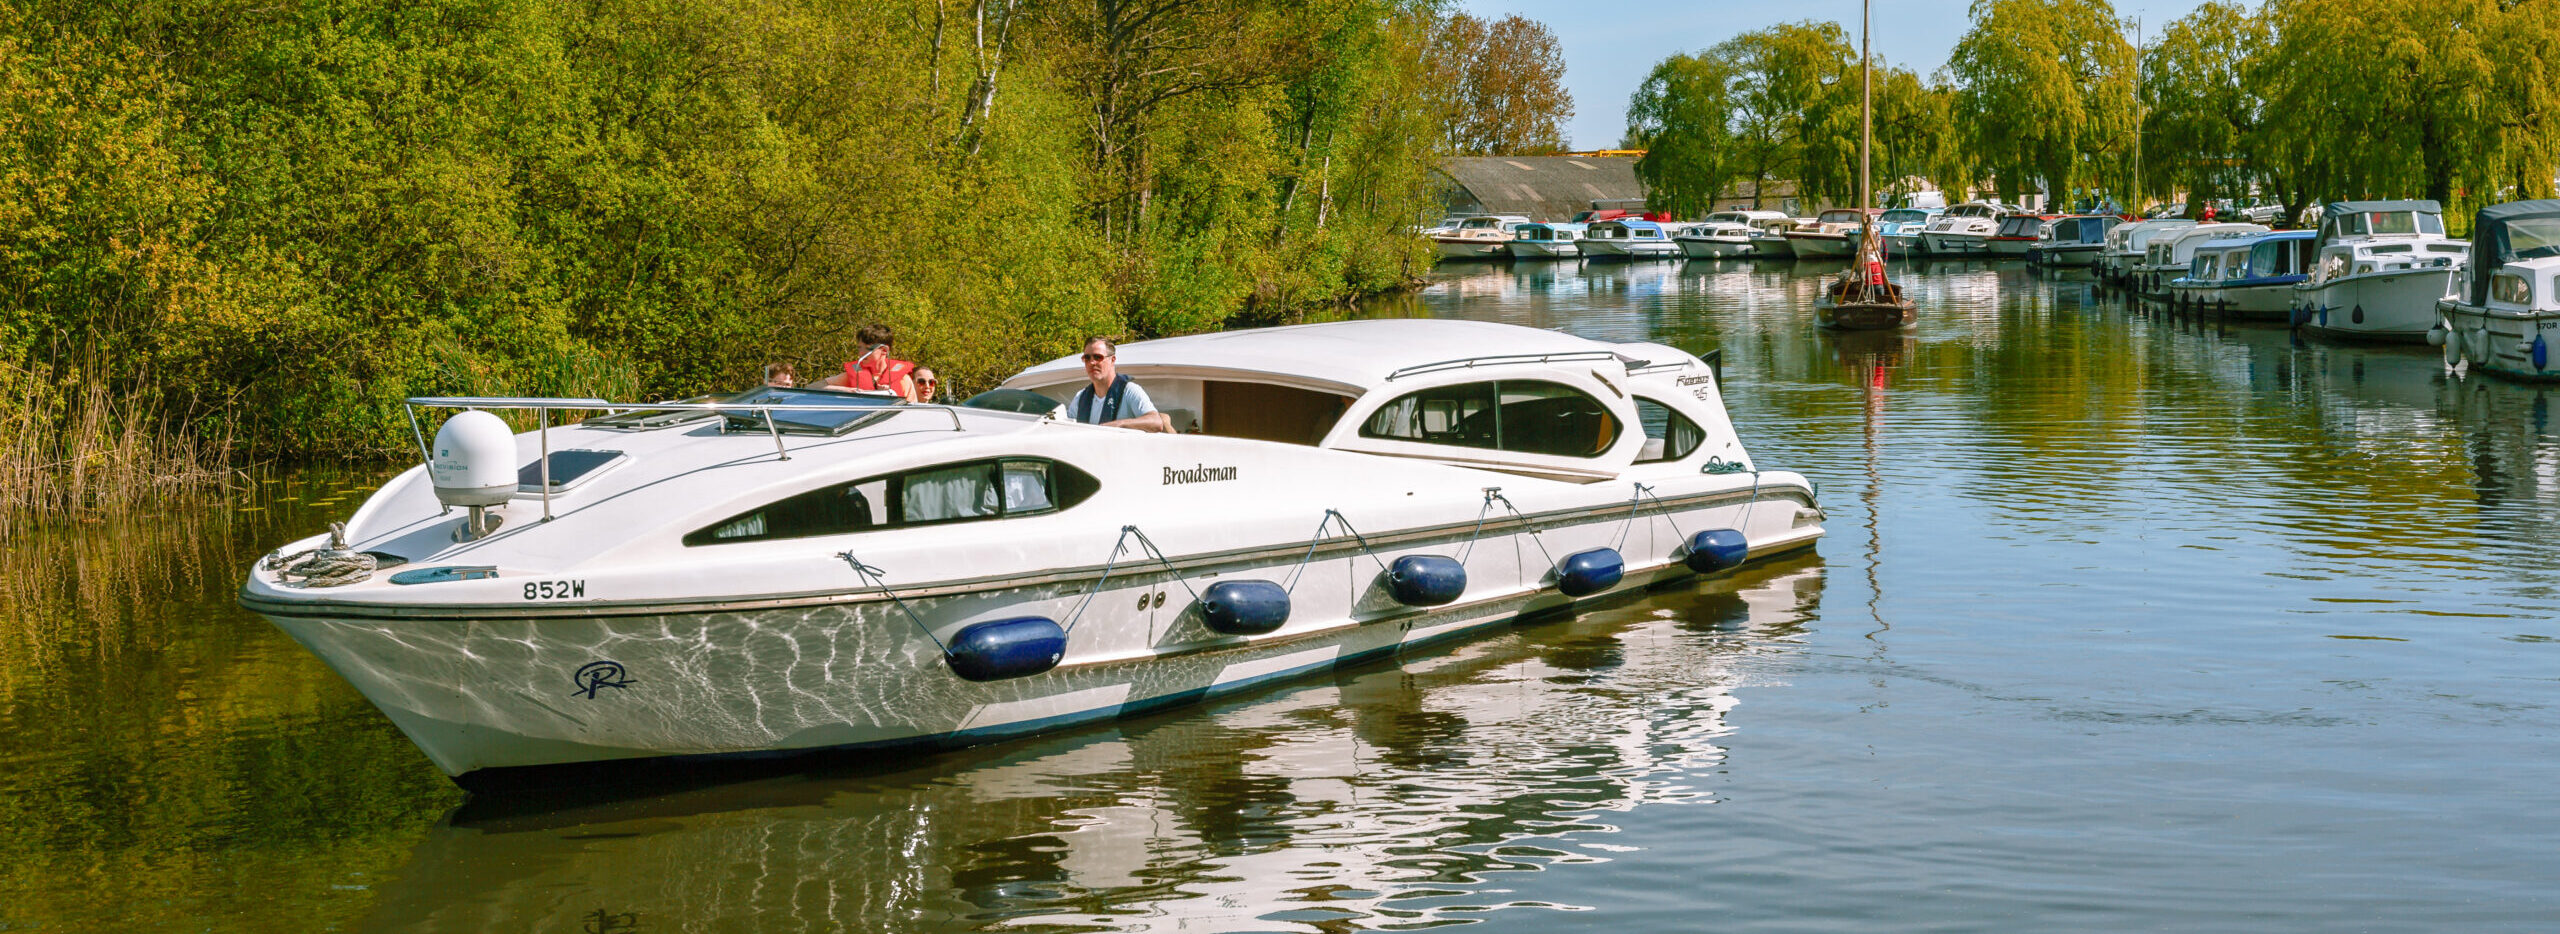 Enjoy a Family Summer Holiday Boating on the Norfolk Broads